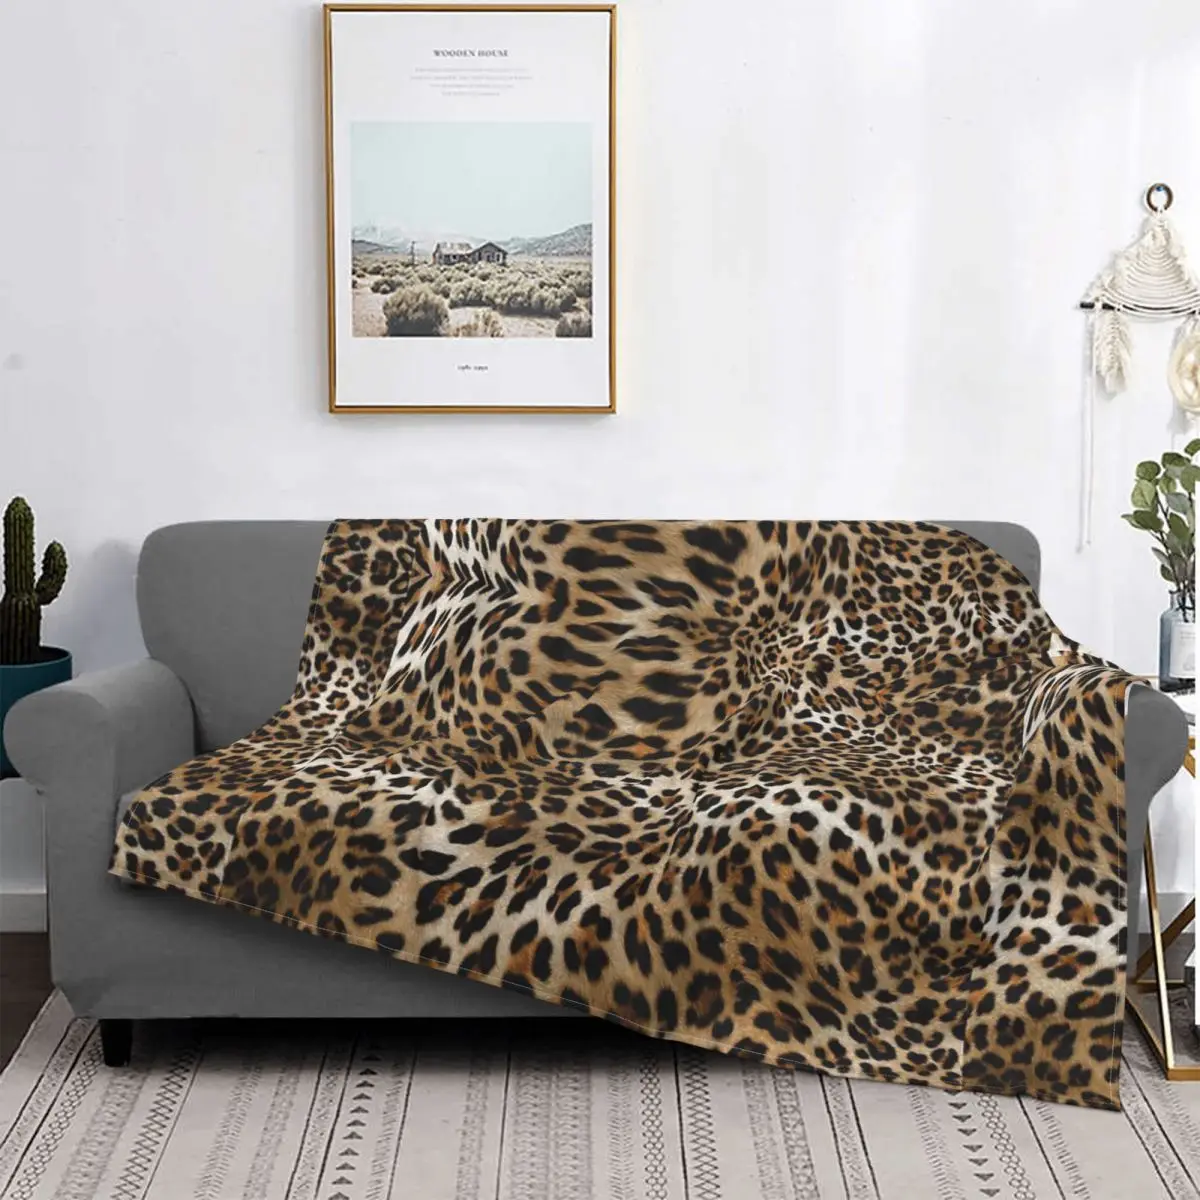 

Leopard Pattern Throw Blanket, Brown Cheetah Print Flannel Fleece Blankets, Fuzzy Plush Animal Spot Blanket for Bed Couch Sofa